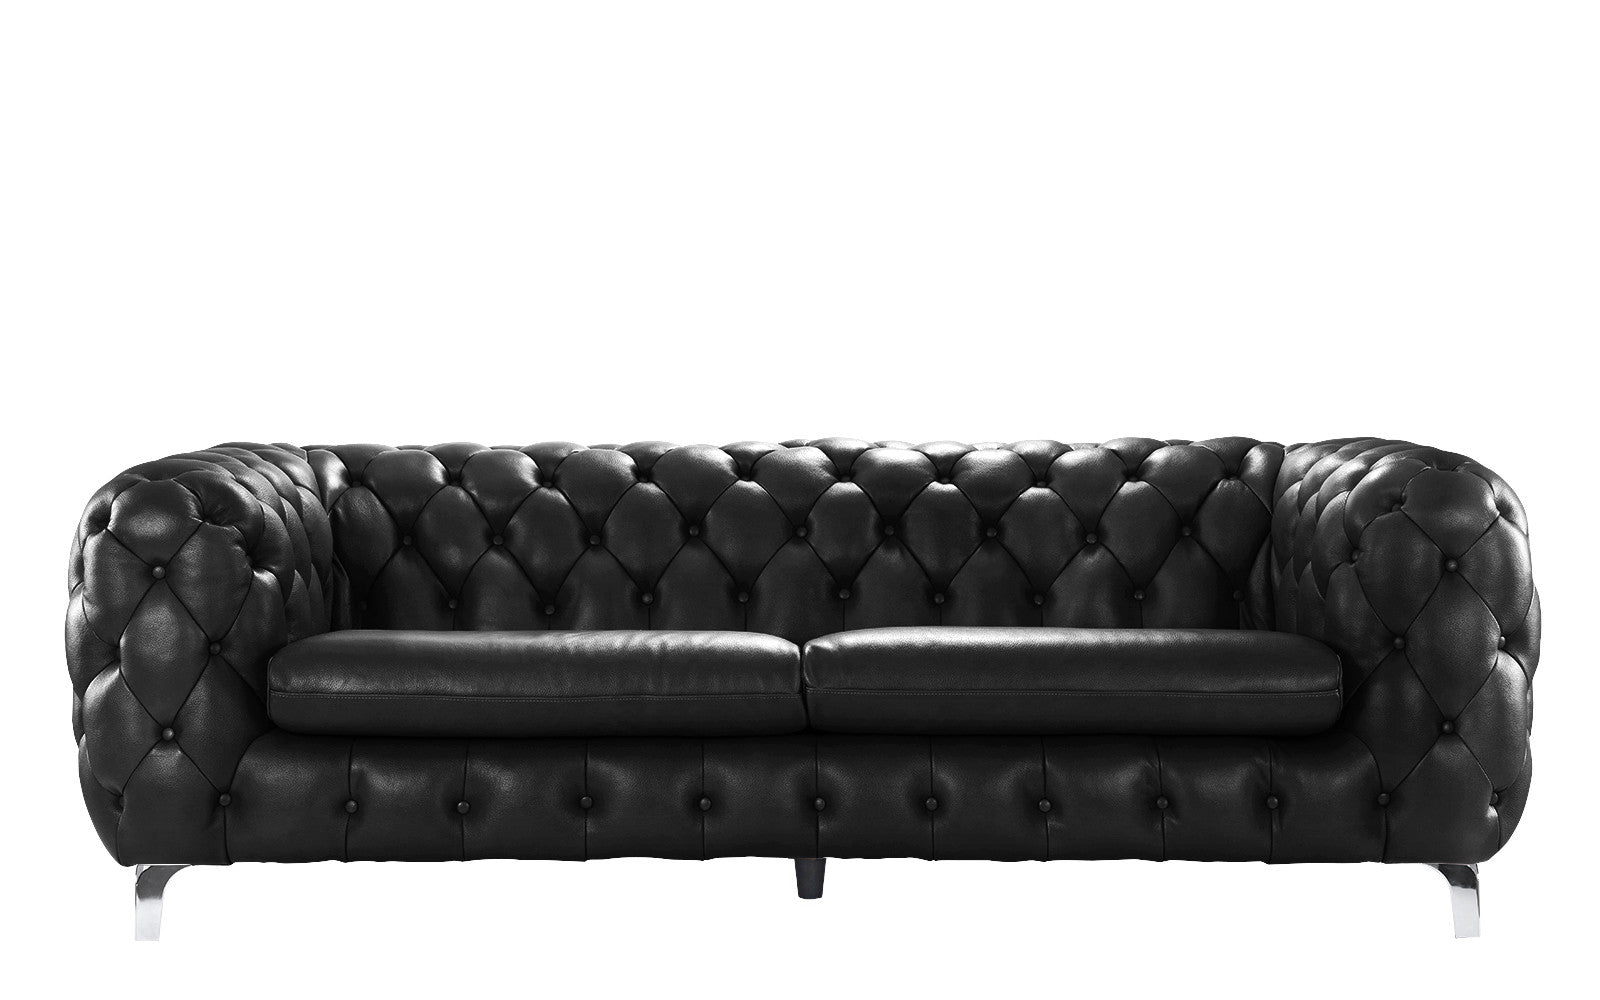 EXP147-BLK York Glamour Boudoir Tufted Leather Sofa with Buil sku EXP147-BLK